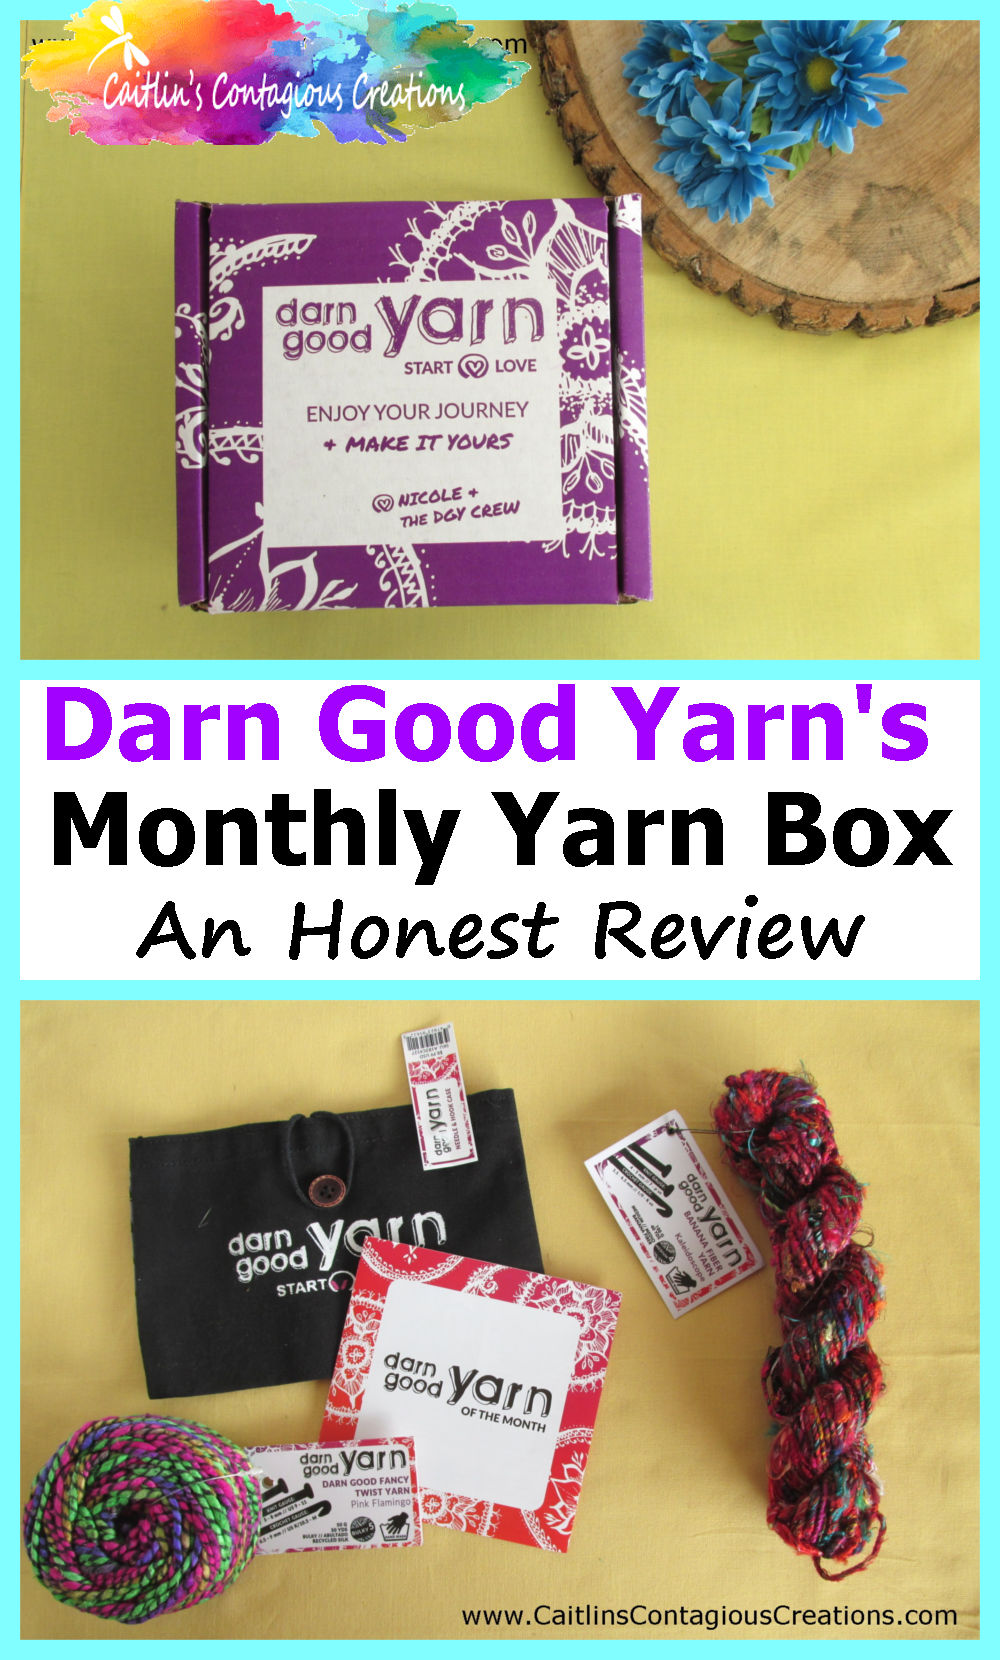 Darn Good Yarn Box Review from Caitlin's Contagious Creations. An honest review with all the info every crochet or knitter wants to know before they buy this monthly yarn subscription. #MonthlyCrochetSubscription